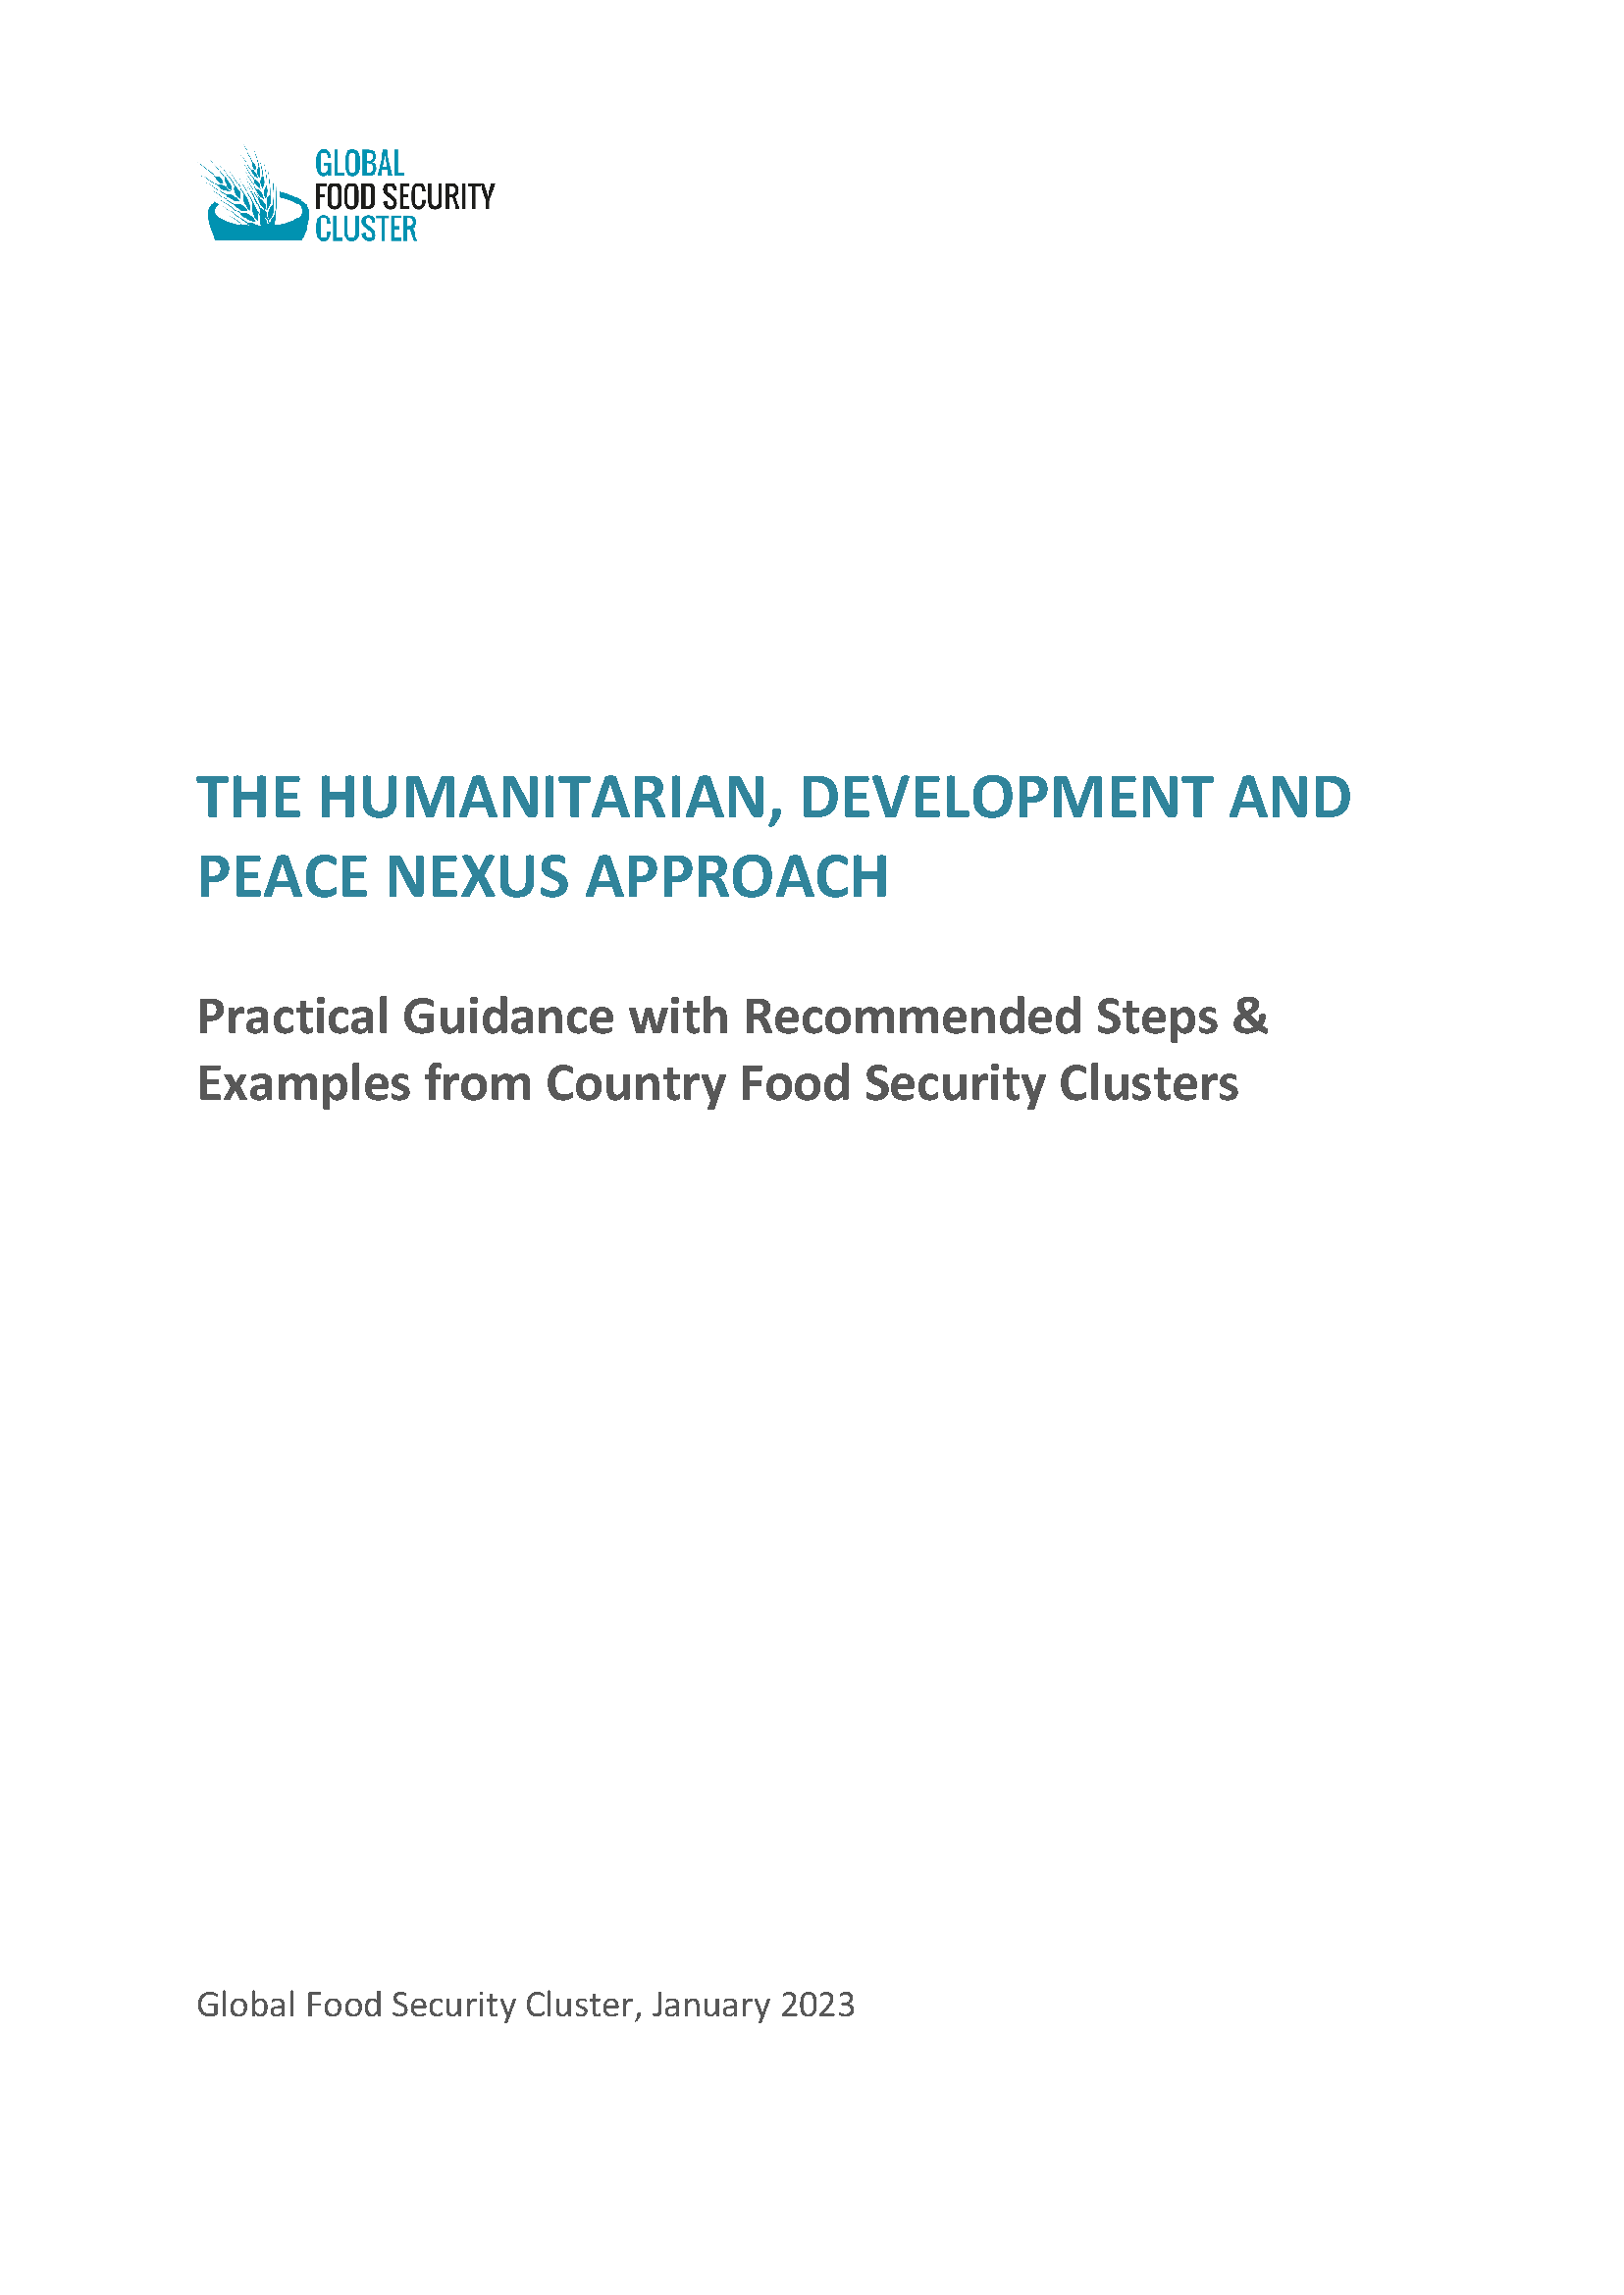 Cover page The Humanitarian, Development, and Peace Nexus Approach: Practical Guidance with Recommended Steps & Examples from Country Food Security Clusters